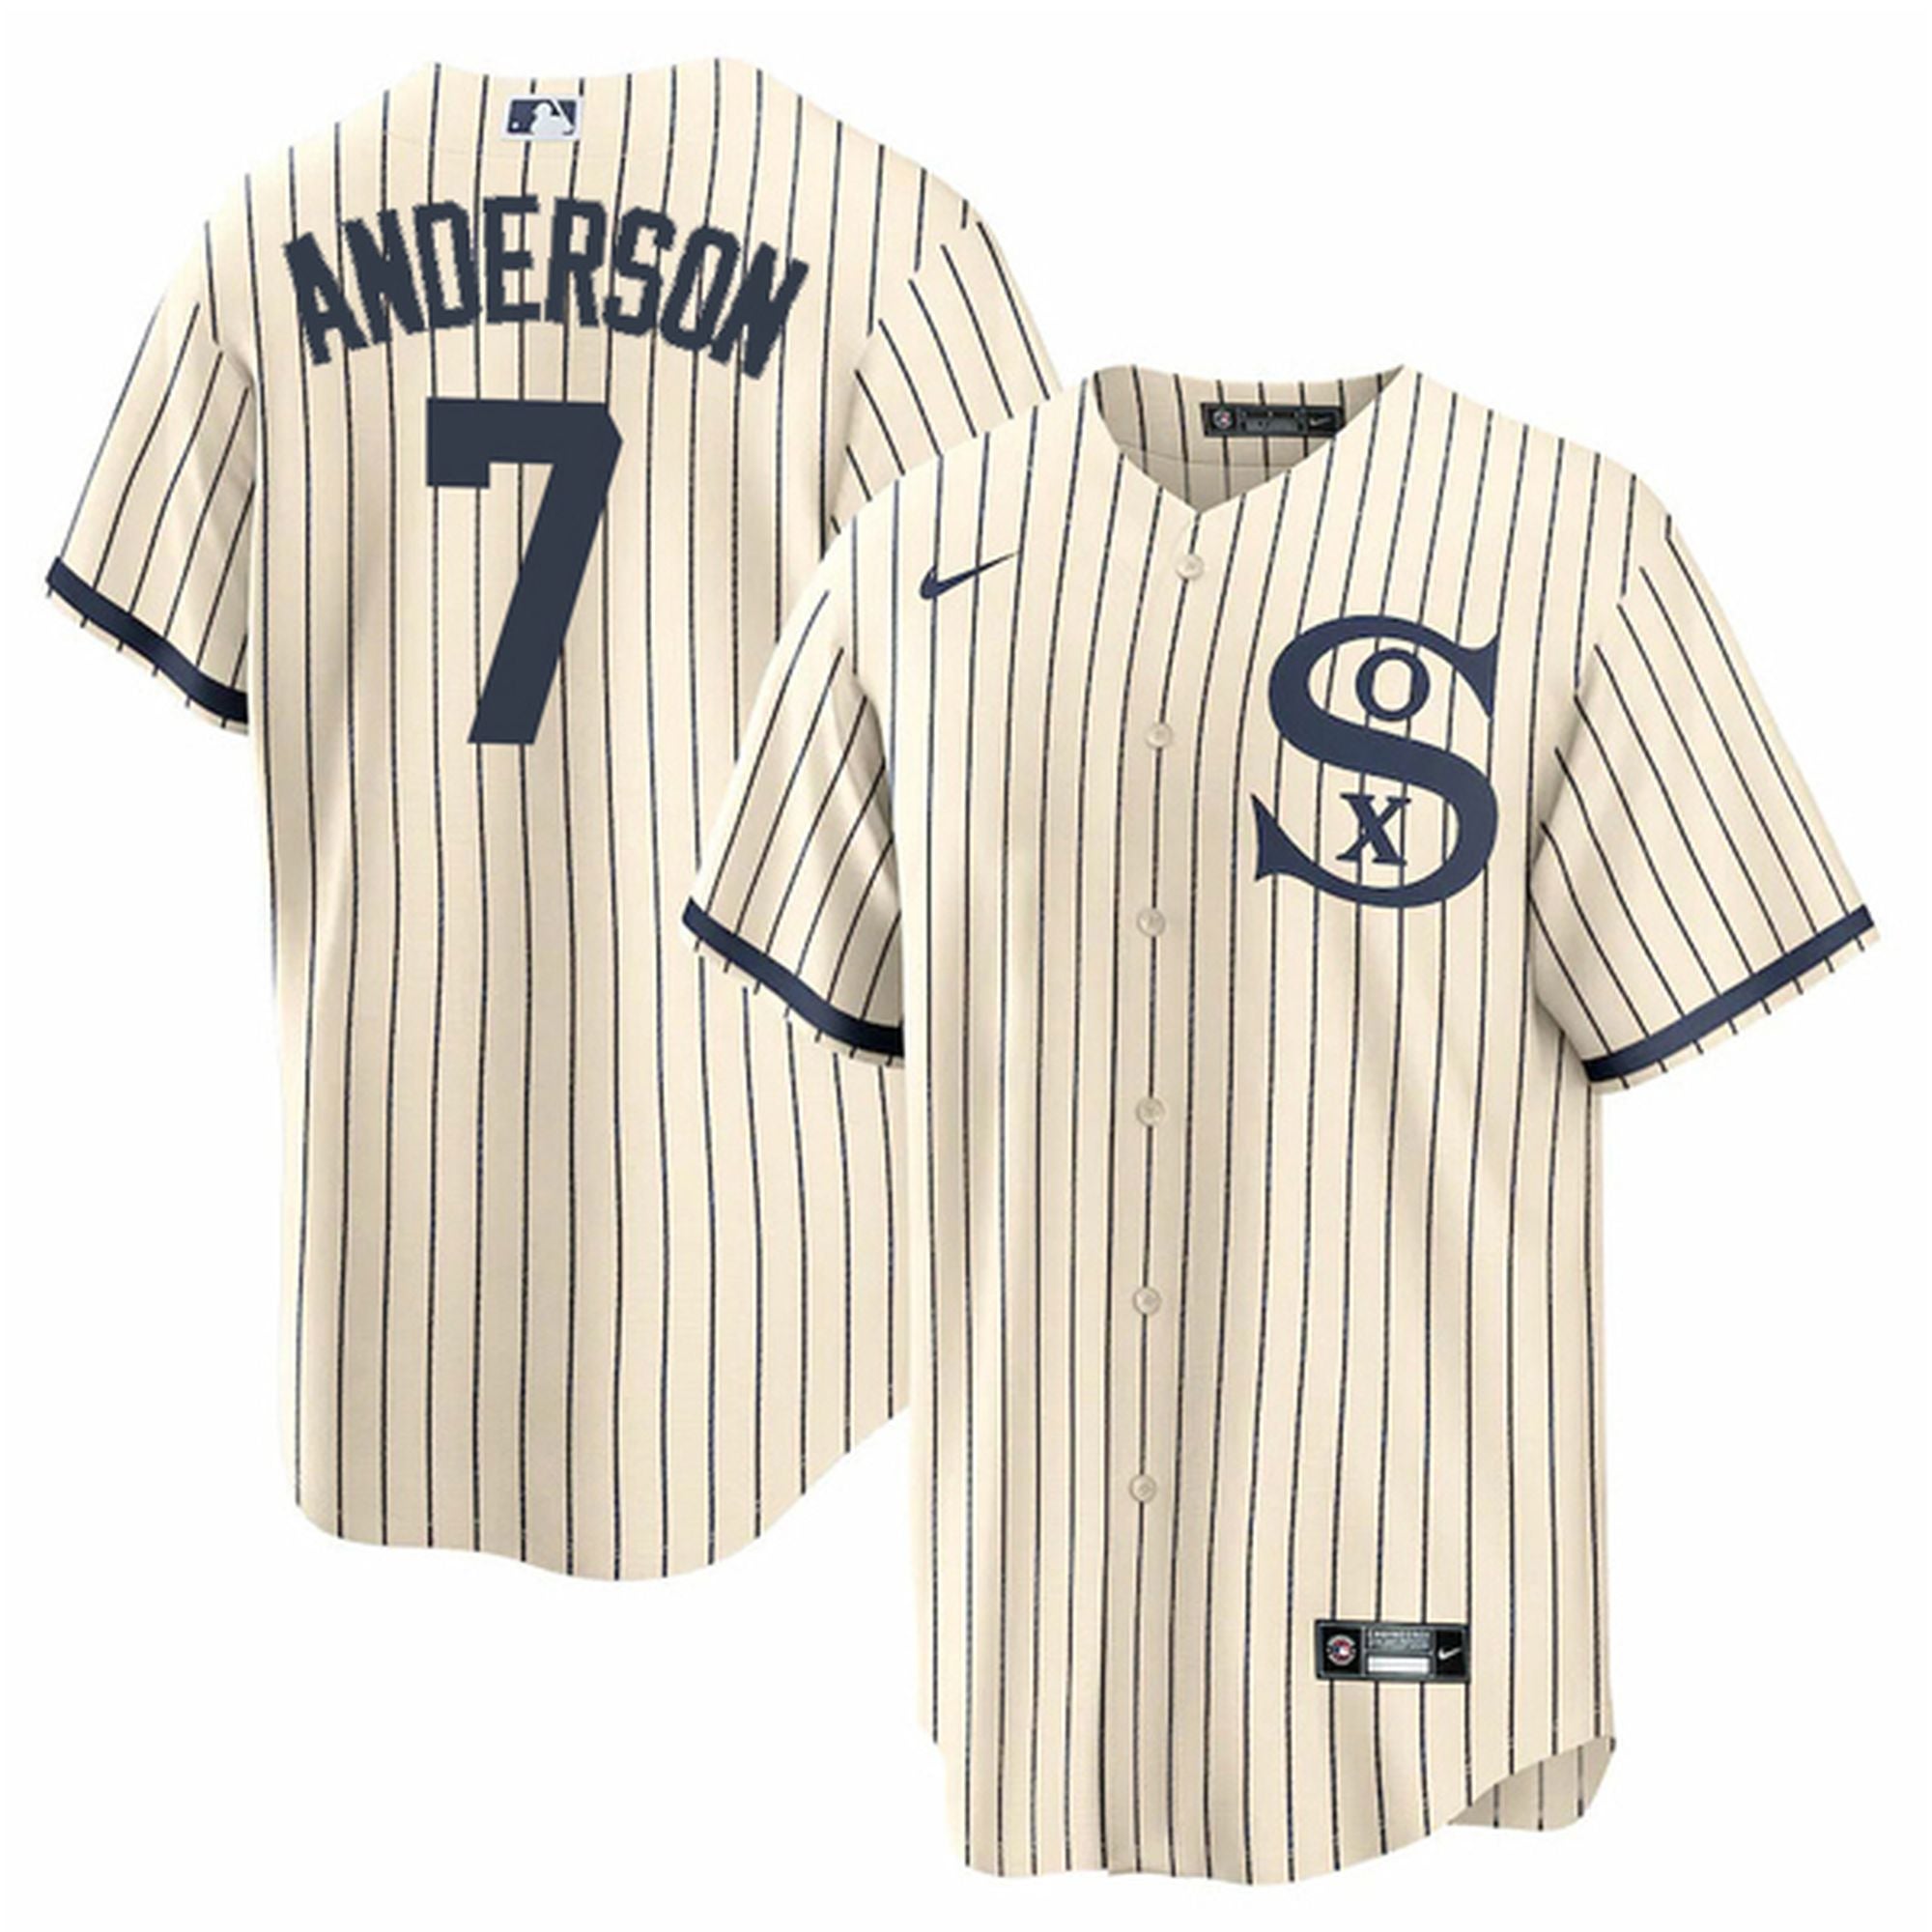 Tim Anderson 2019 Game-Used Grey Road Jersey - Set 1